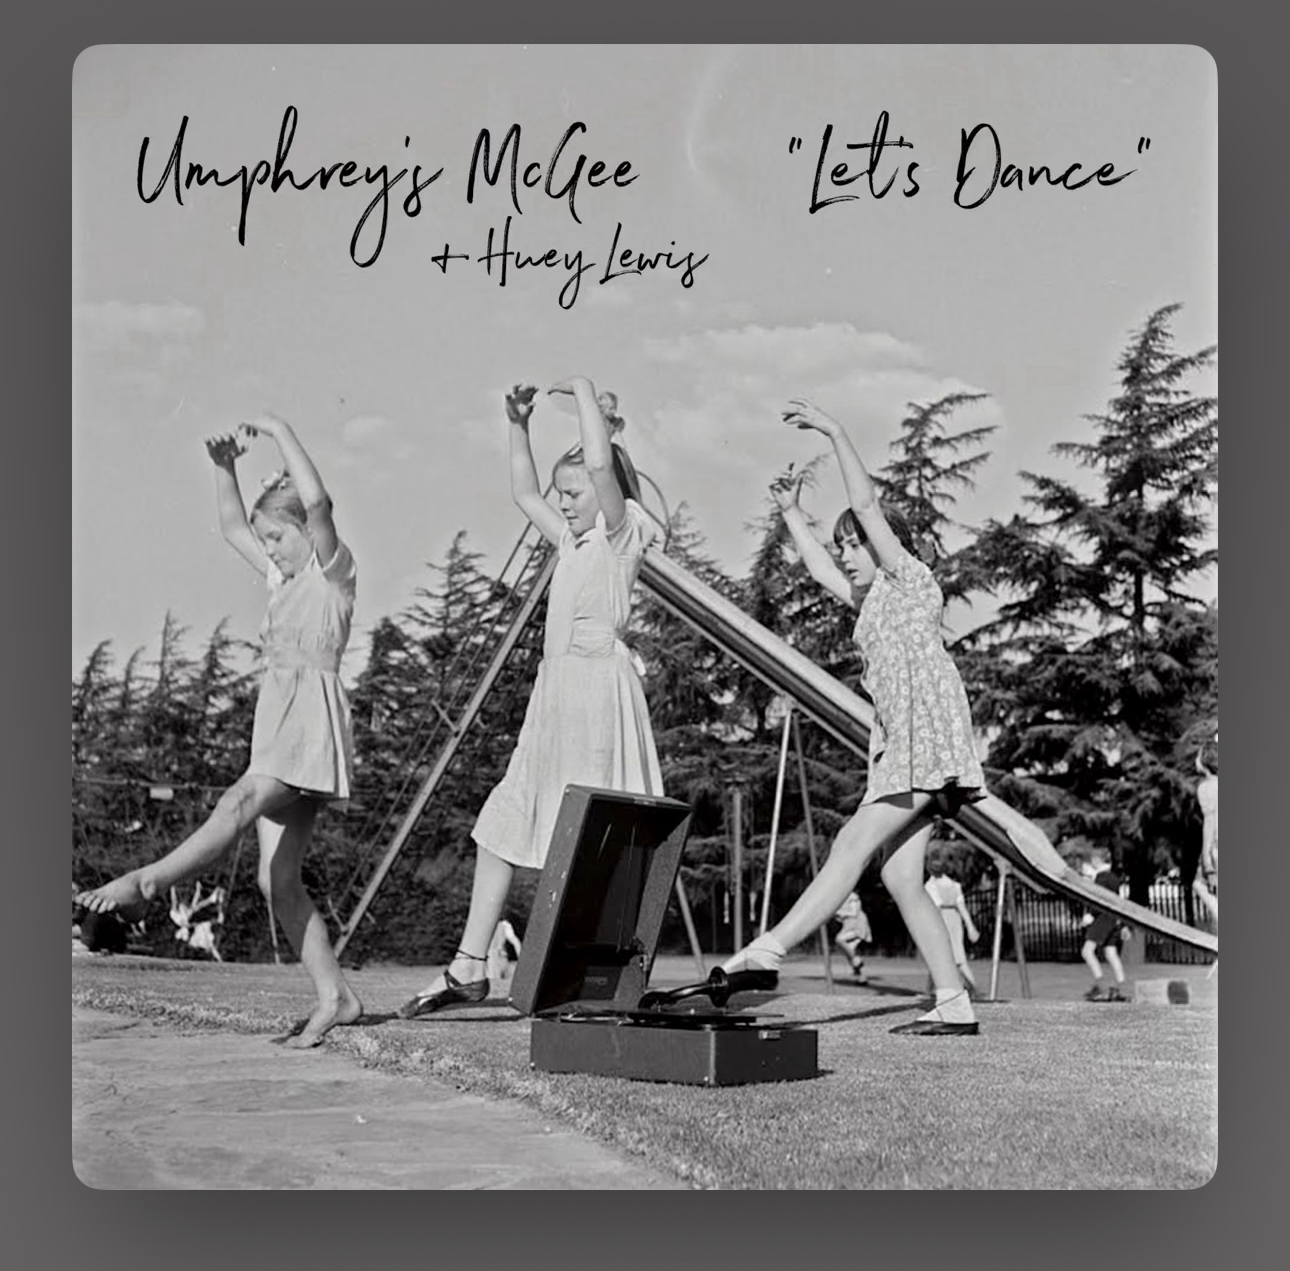 Black-and-white photo of three children joyfully dancing beside a vintage phonograph in an outdoor setting with trees in the background. The image features the text “Umphrey’s McGee + Huey Lewis ‘Let’s Dance’